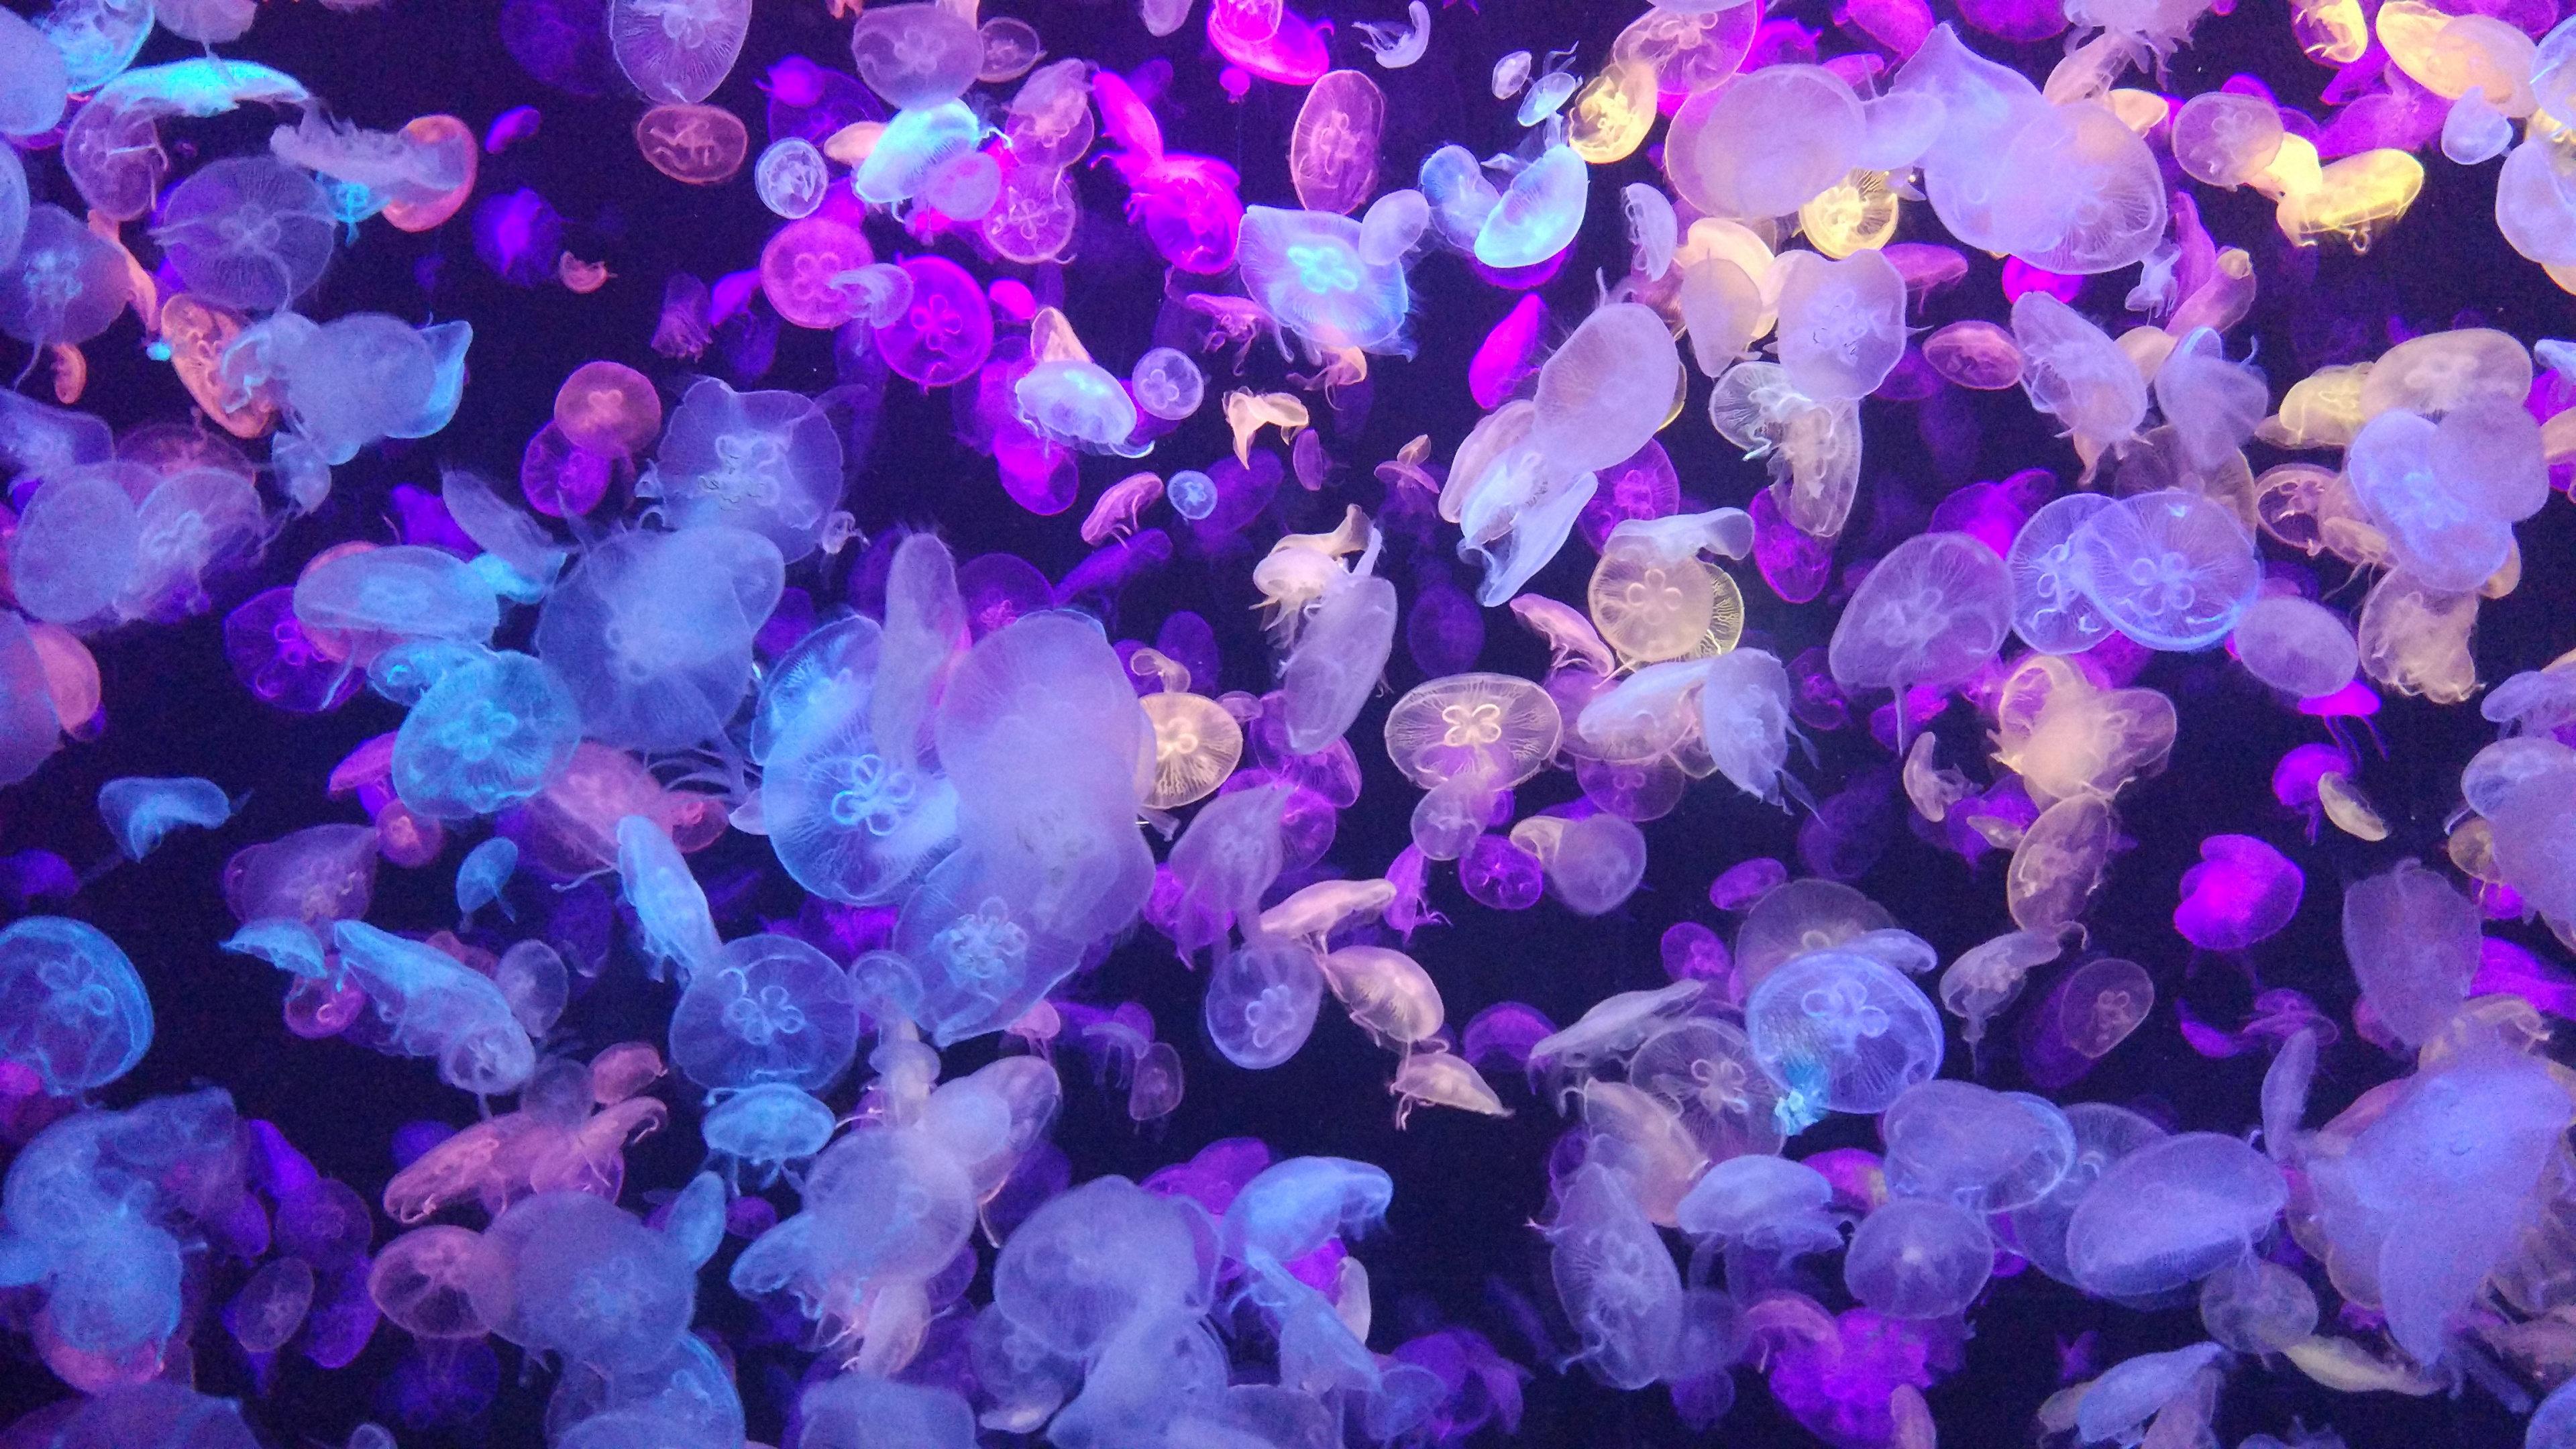 Purple and White Jelly Fish. Wallpaper in 3840x2160 Resolution